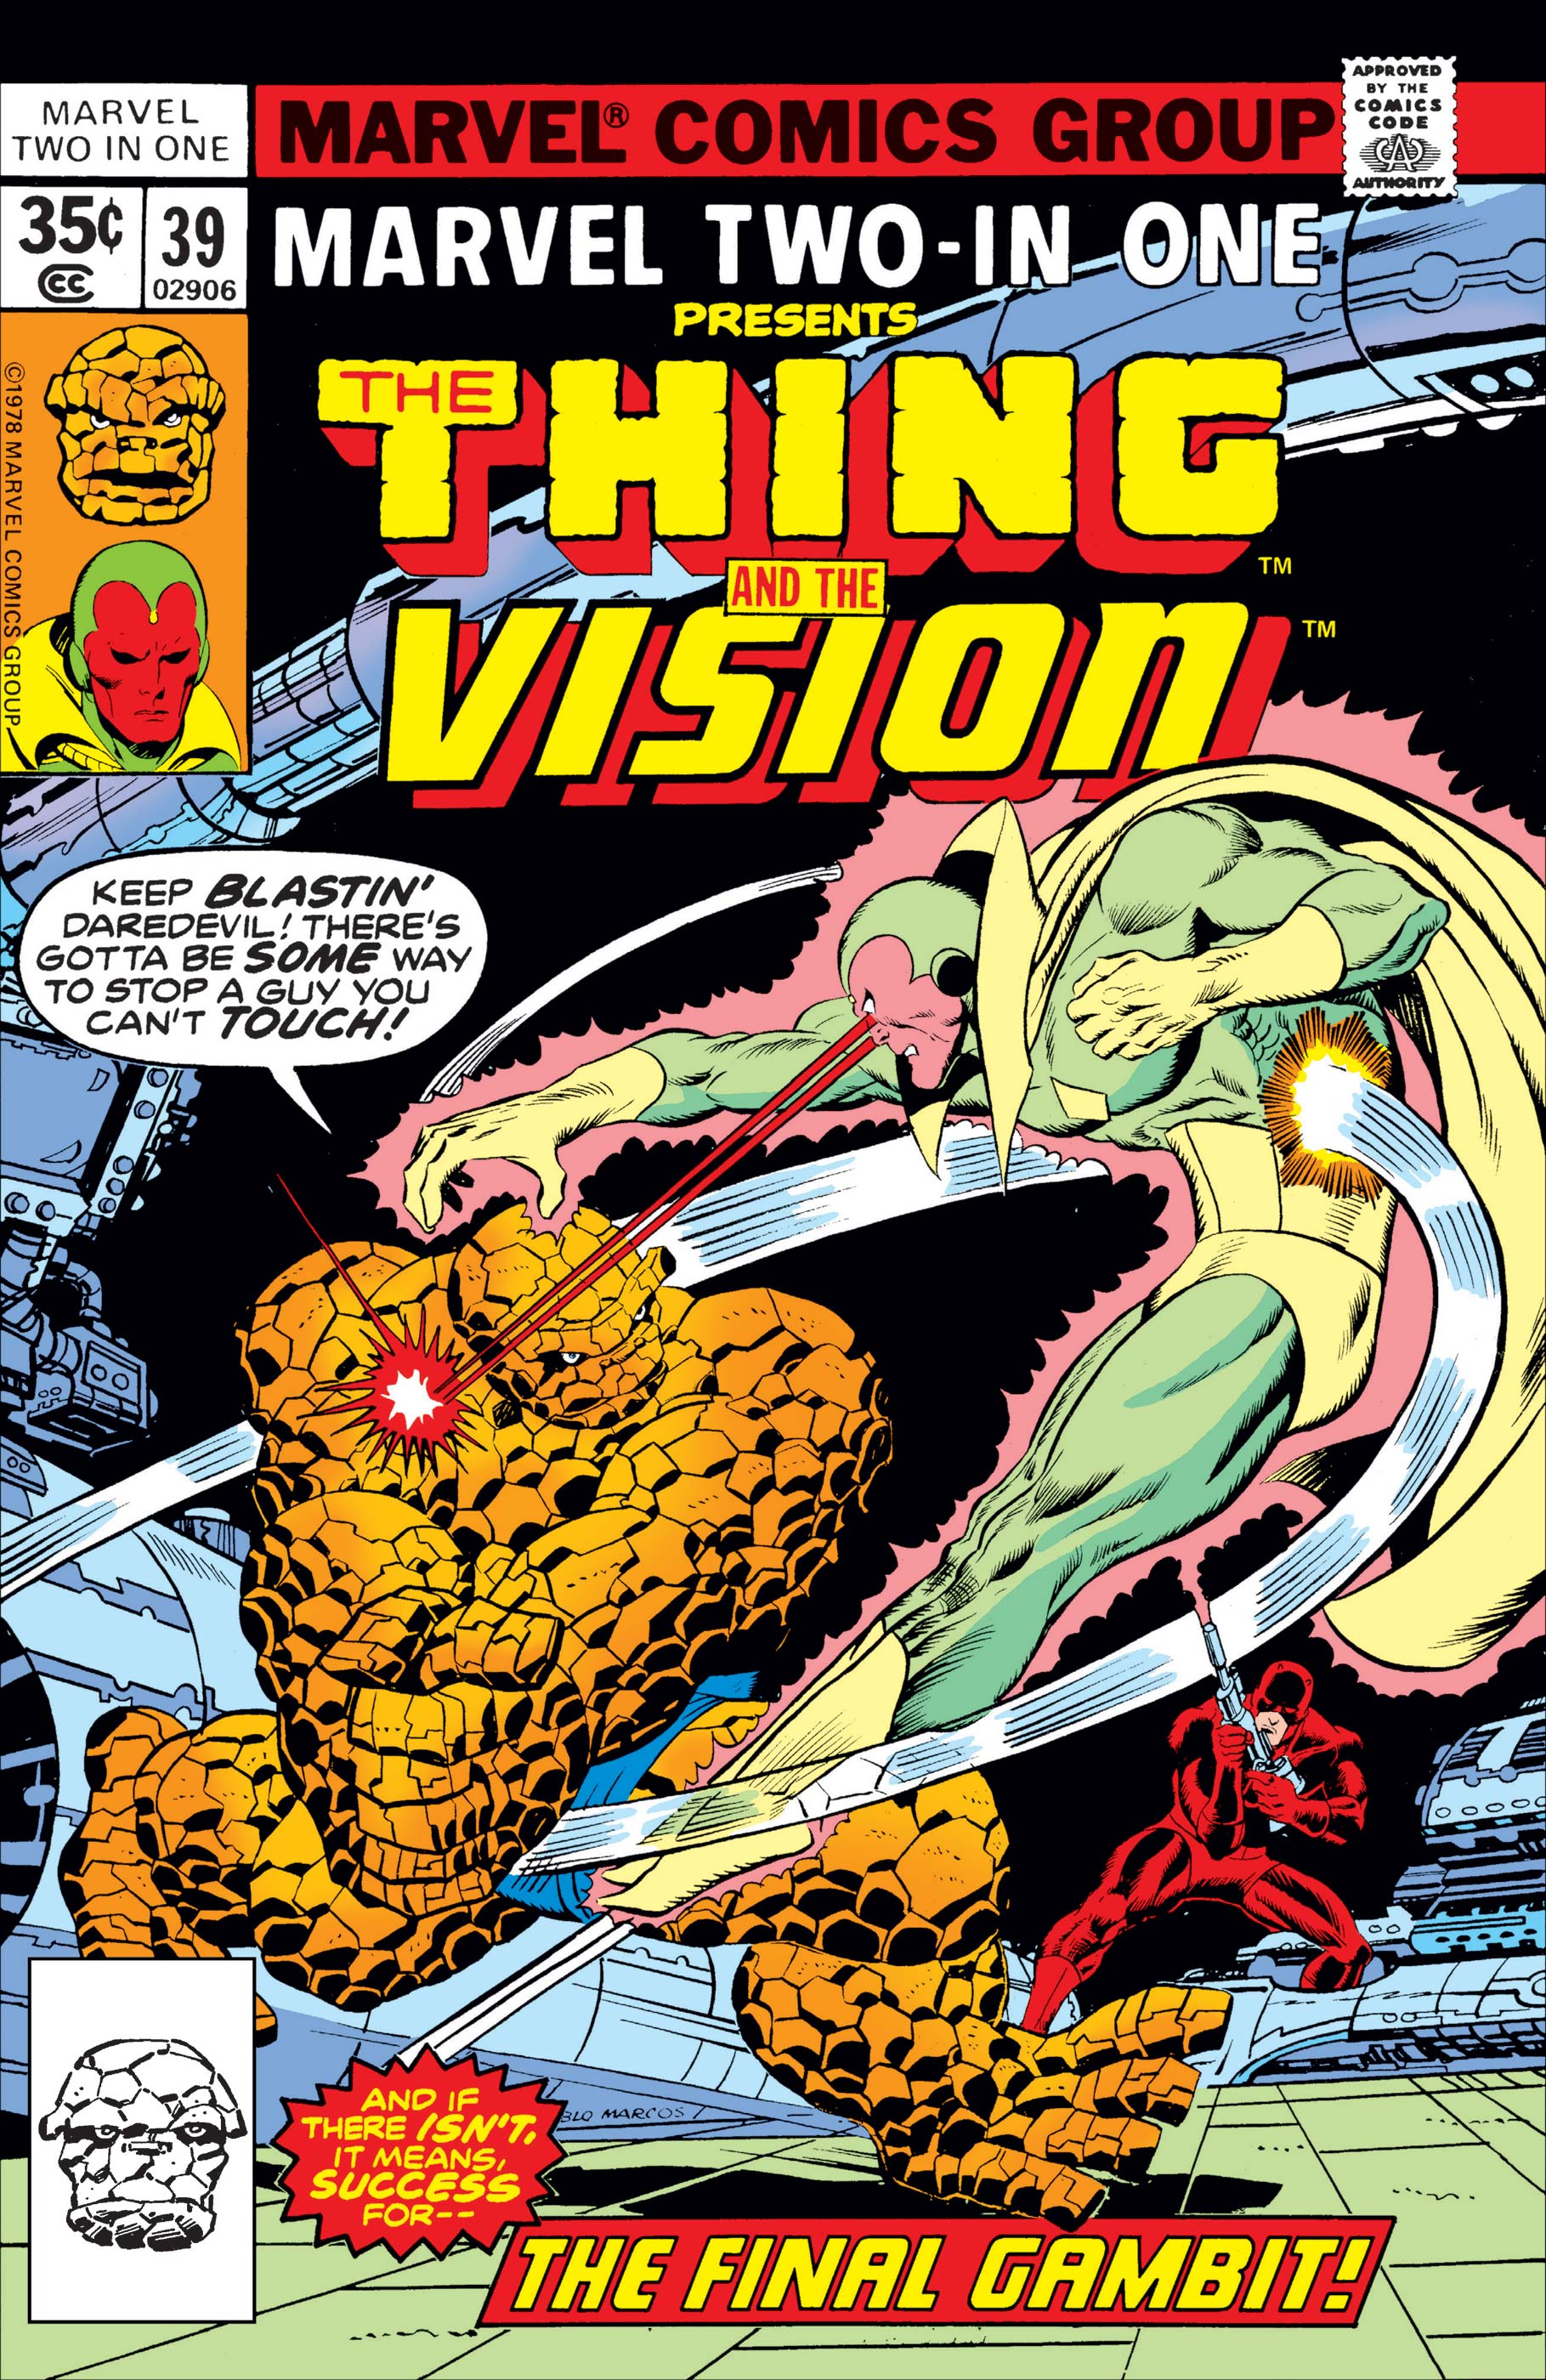 Marvel Two-in-One (1974) #39